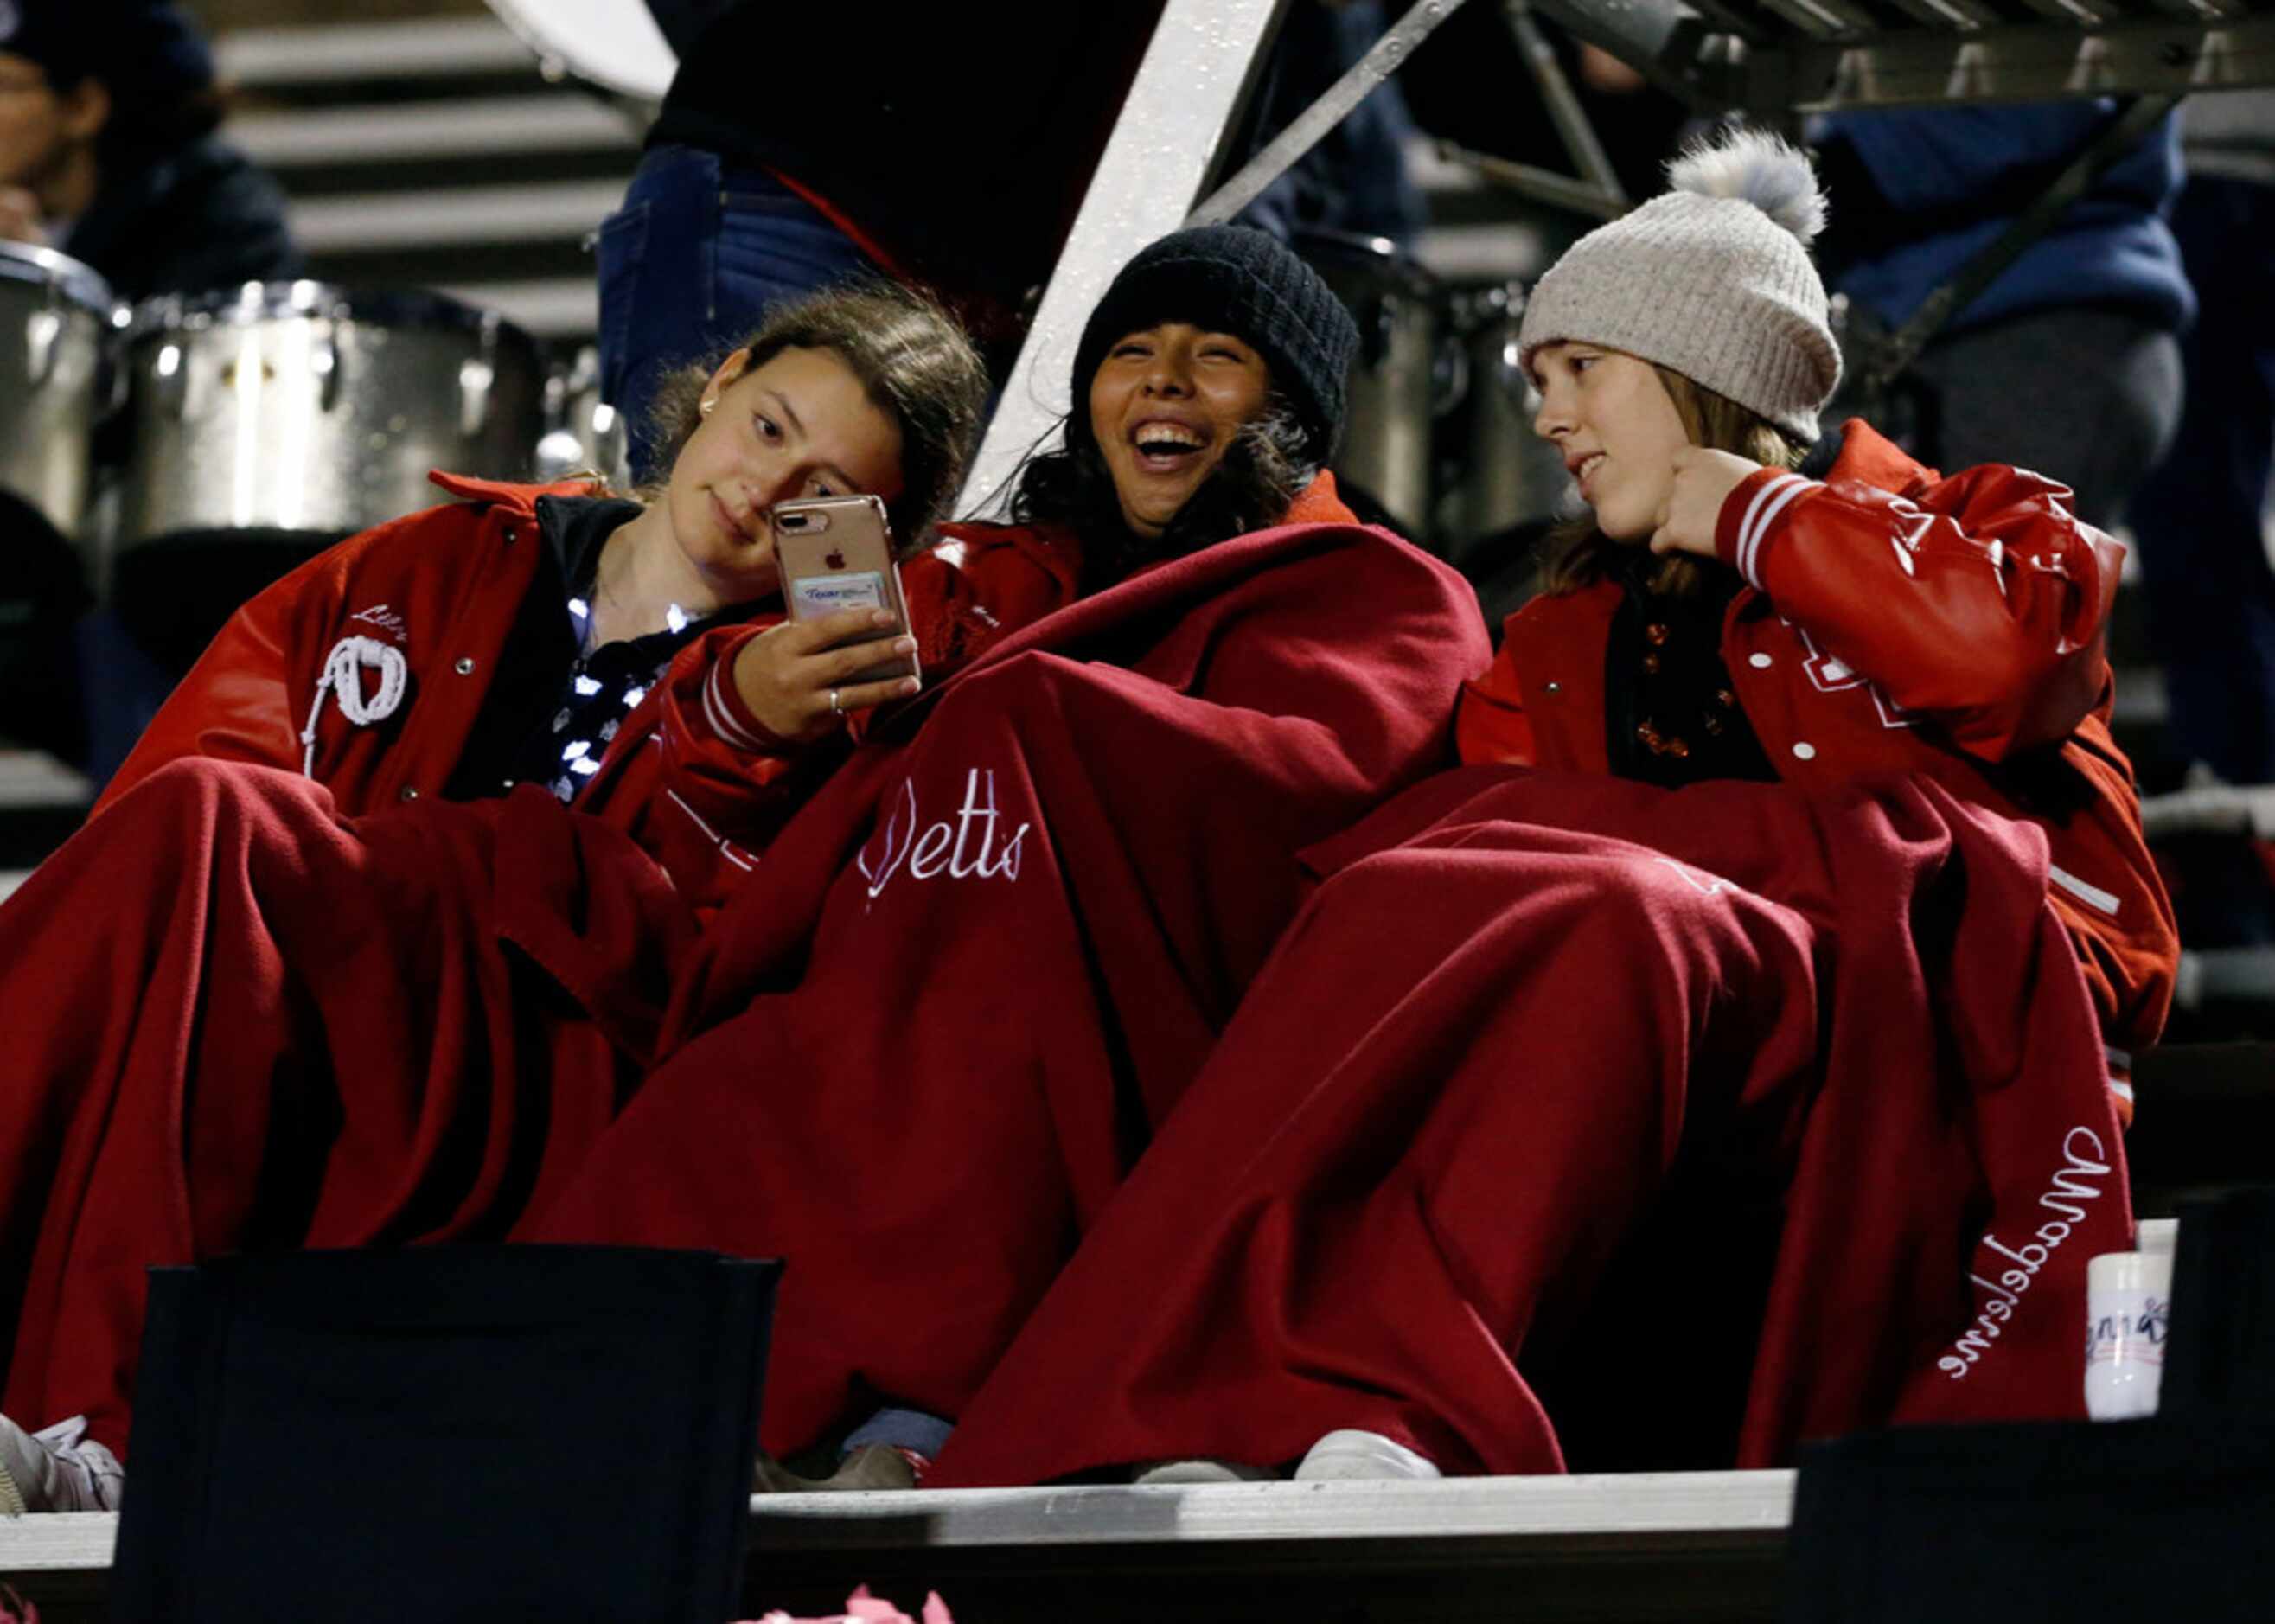 Three bundled up Lake Highlands students enjoy looking at a mobile phone during the first...